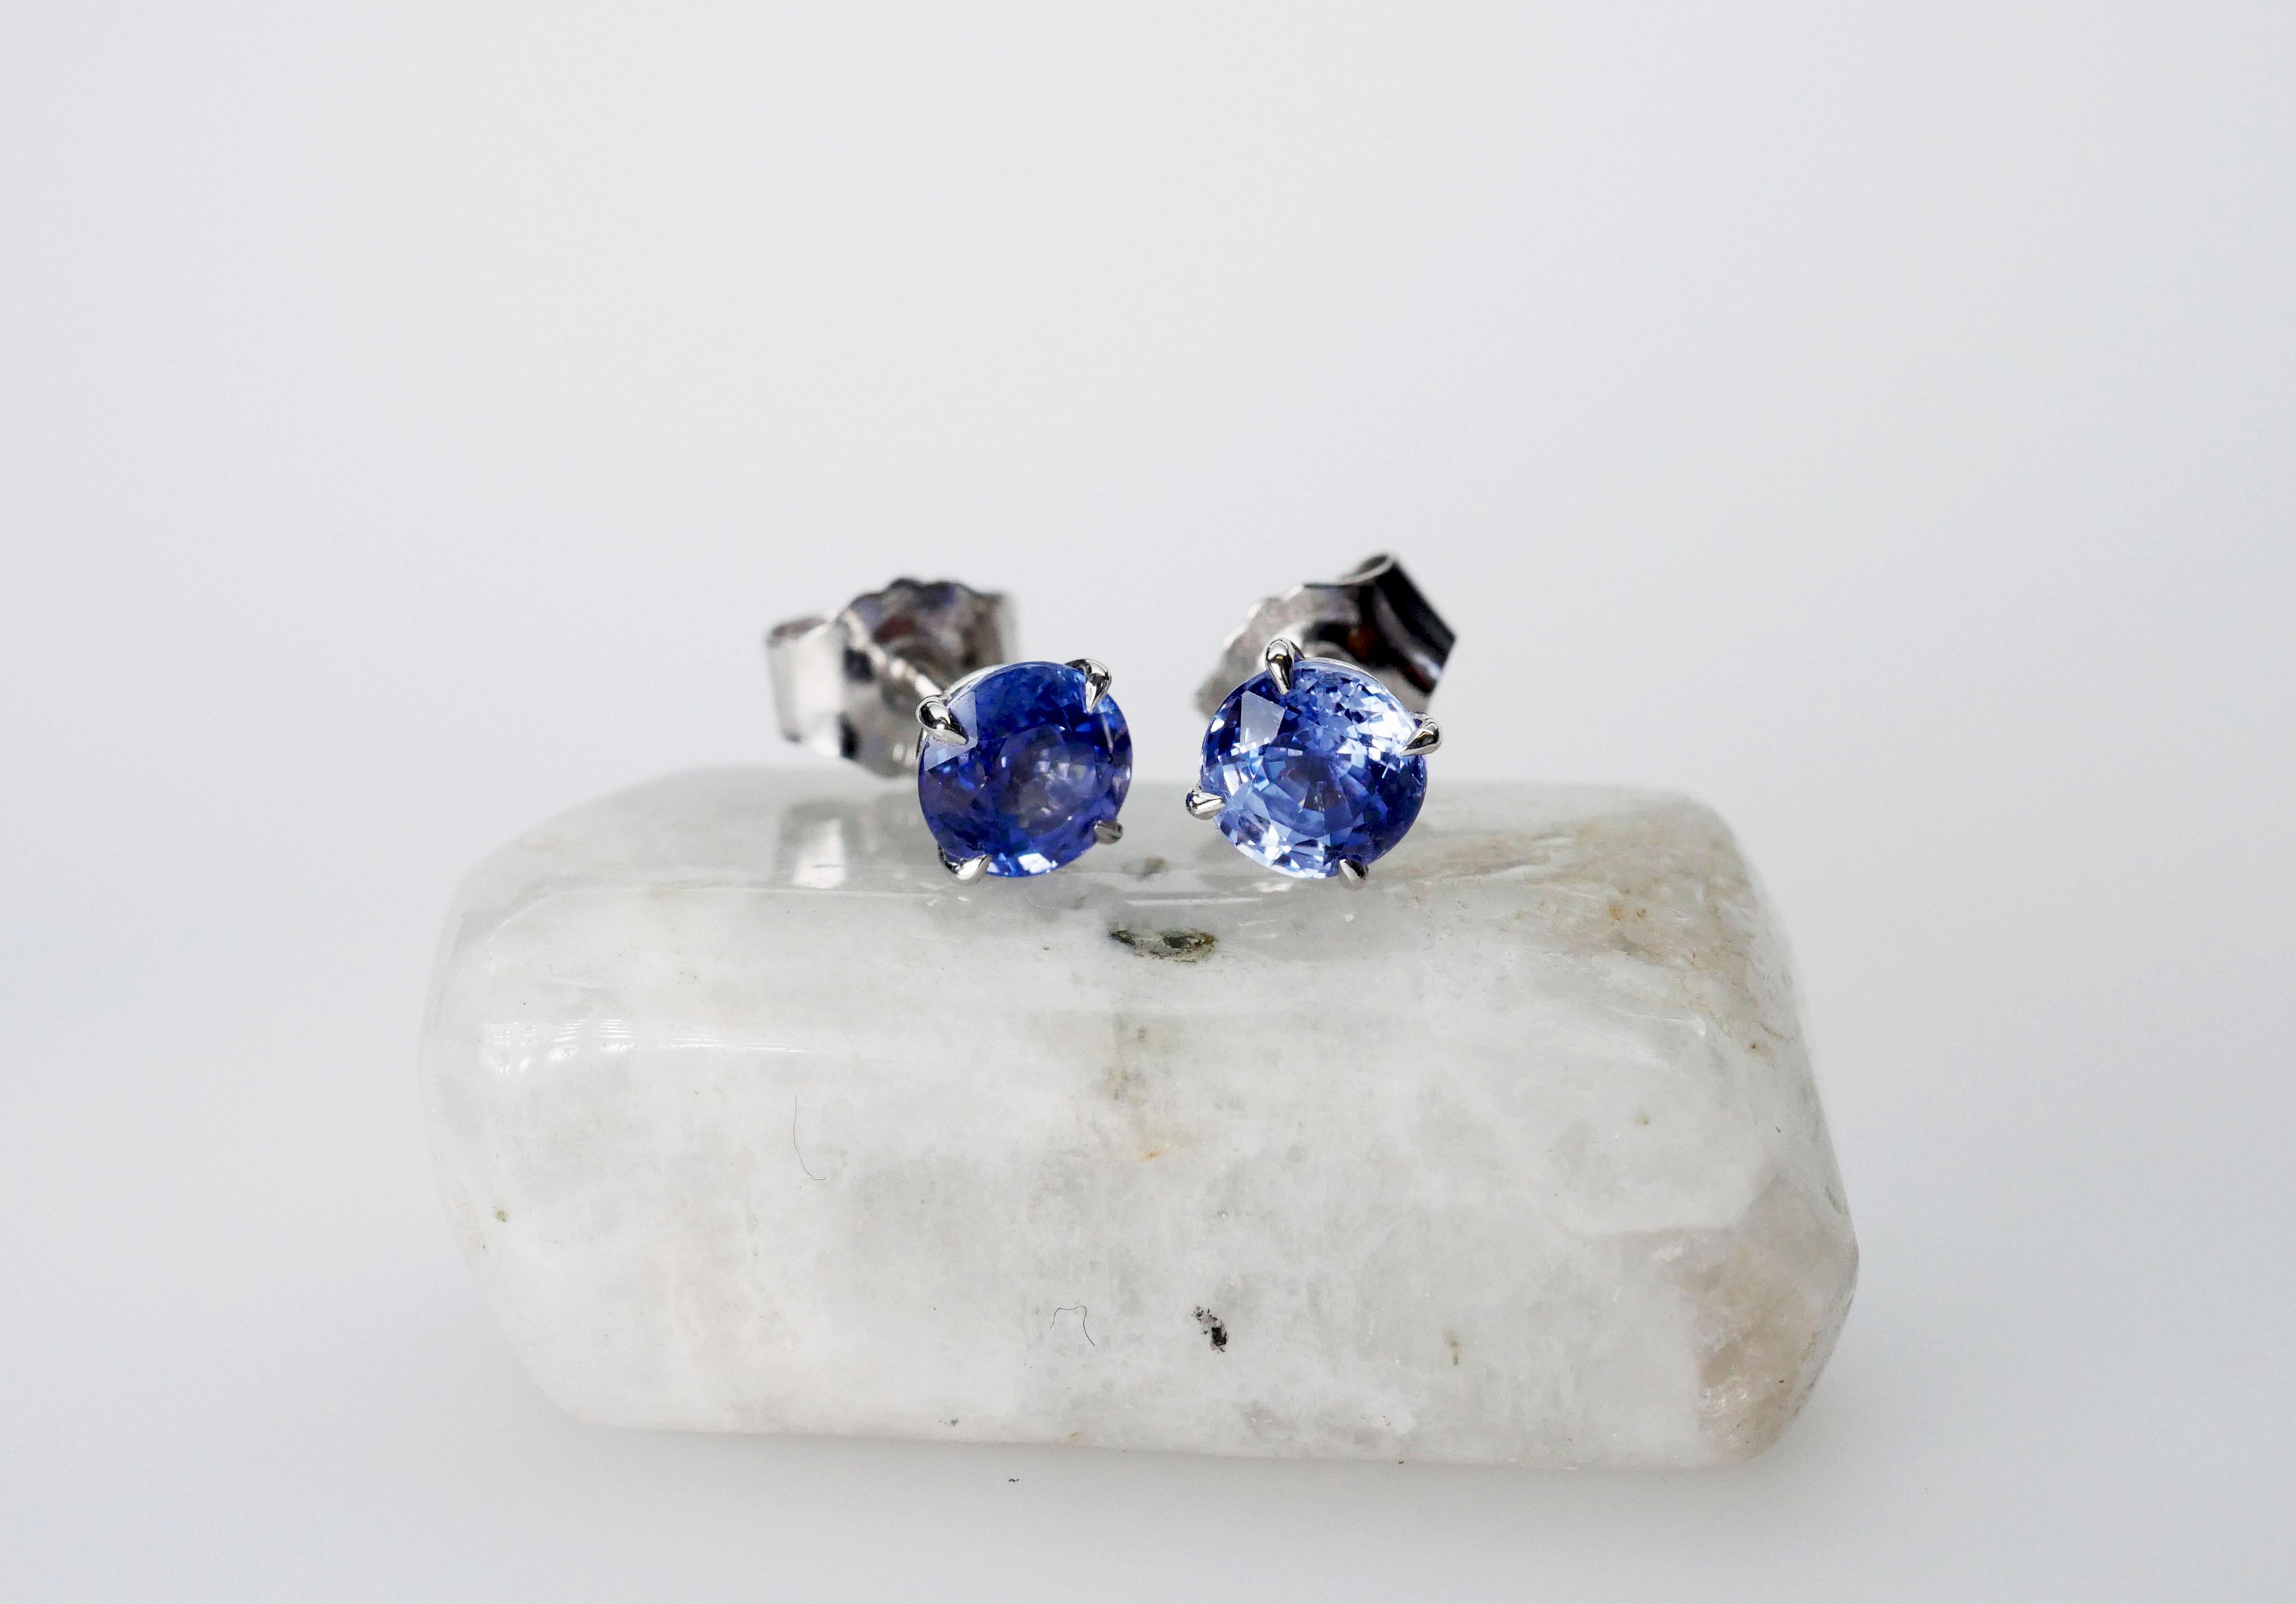 Handmade solitaire light blue round sapphire stud earrings in 18k white gold. Minimal and elegant with talon-shaped claws and an open basket setting, perfect to wear solo or stacked.

Total Sapphire Weight 2/1.16 Carat